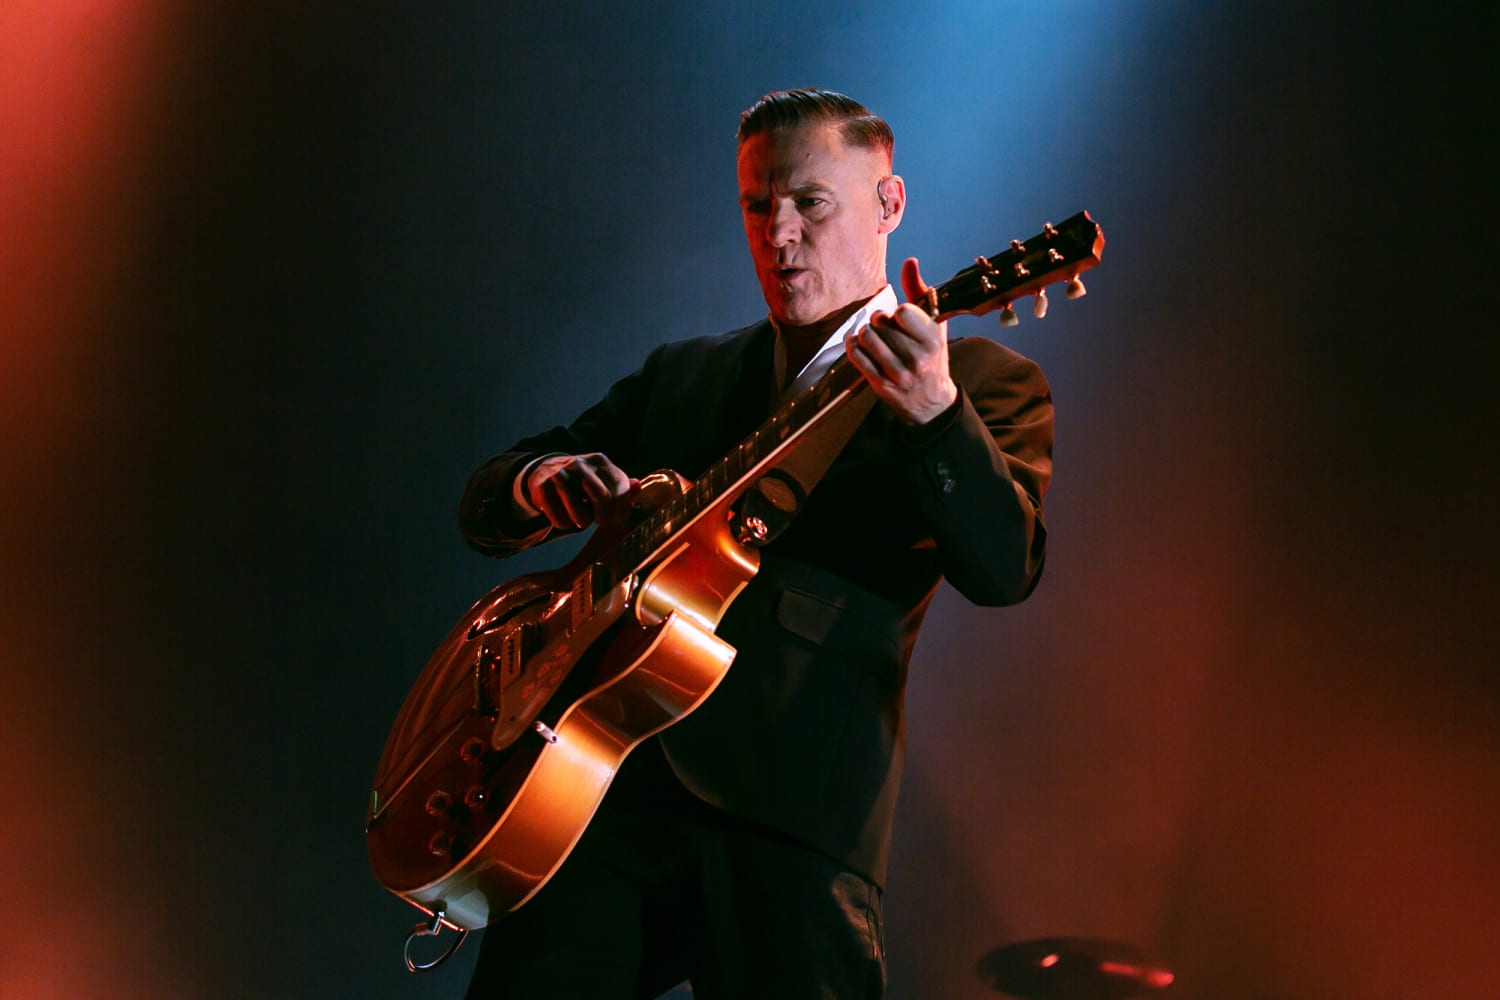 Canadian singer Bryan Adams tests positive for COVID after flying to Italy